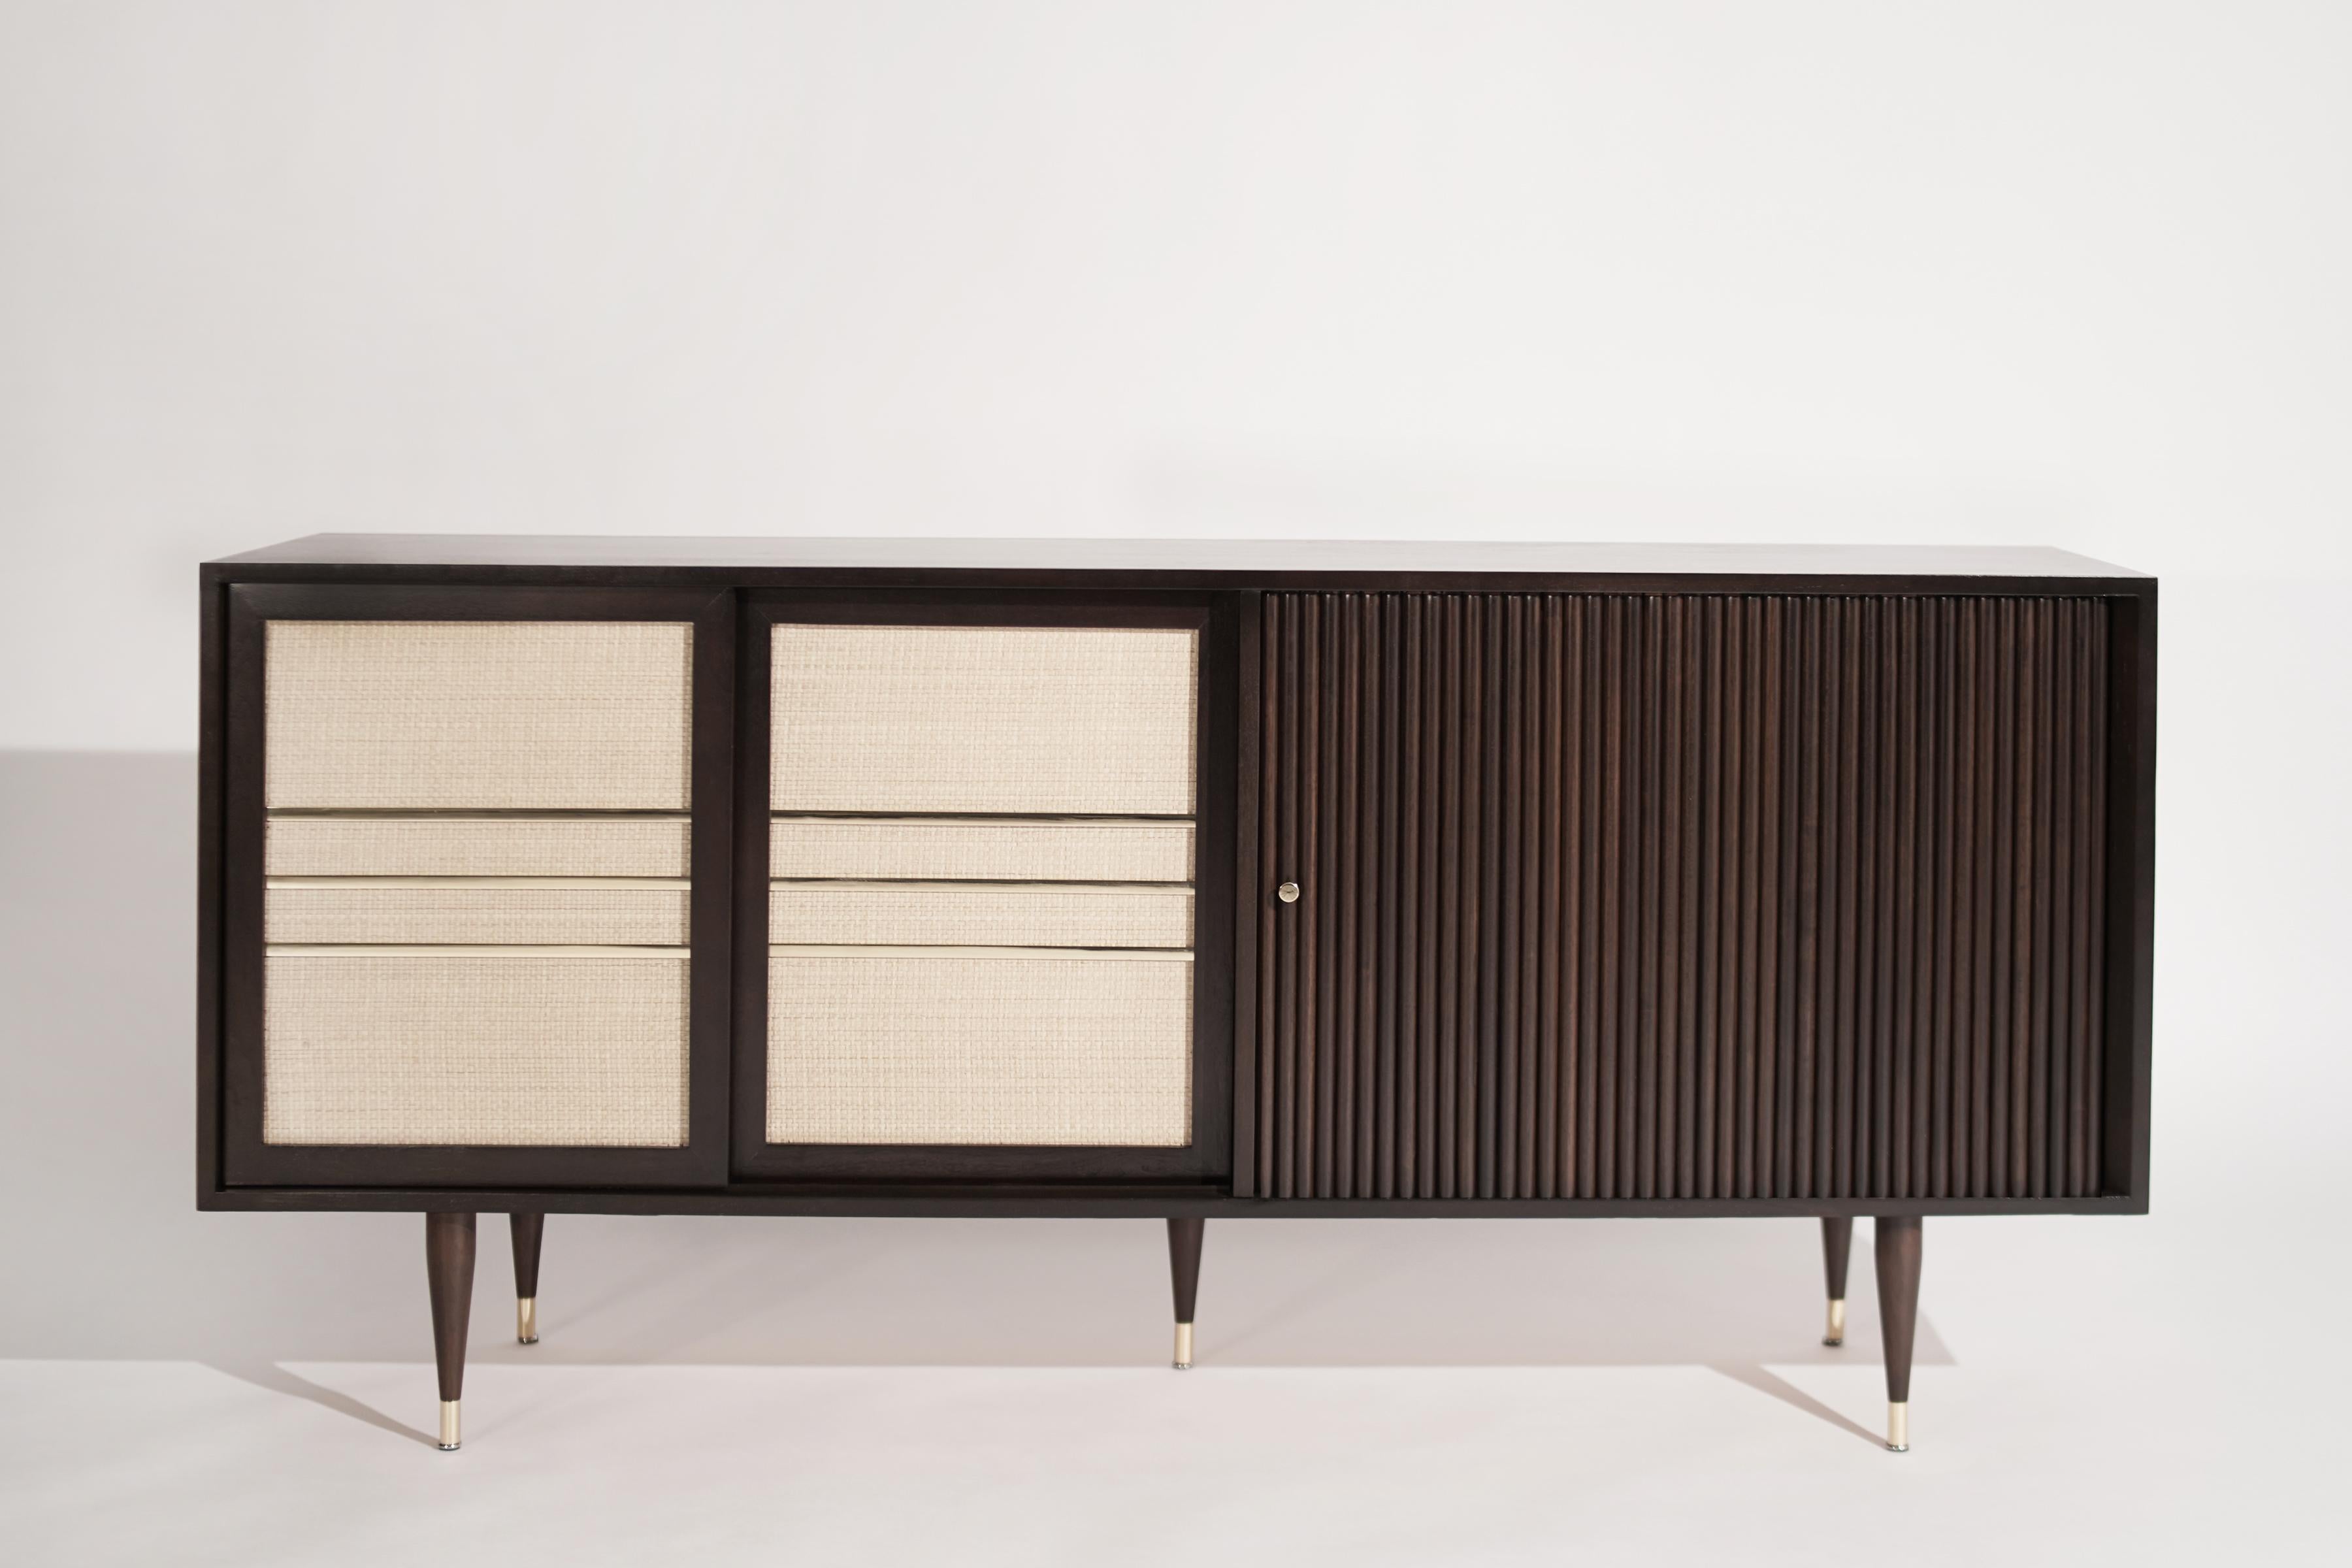 A super unique Mid-Century Modern credenza, circa 1950-1959. Executed in walnut, it features newly basket-weaved sliding doors with brass details and sabots. The left door opens up to reveal shelving, meanwhile, the right tambour door provides large